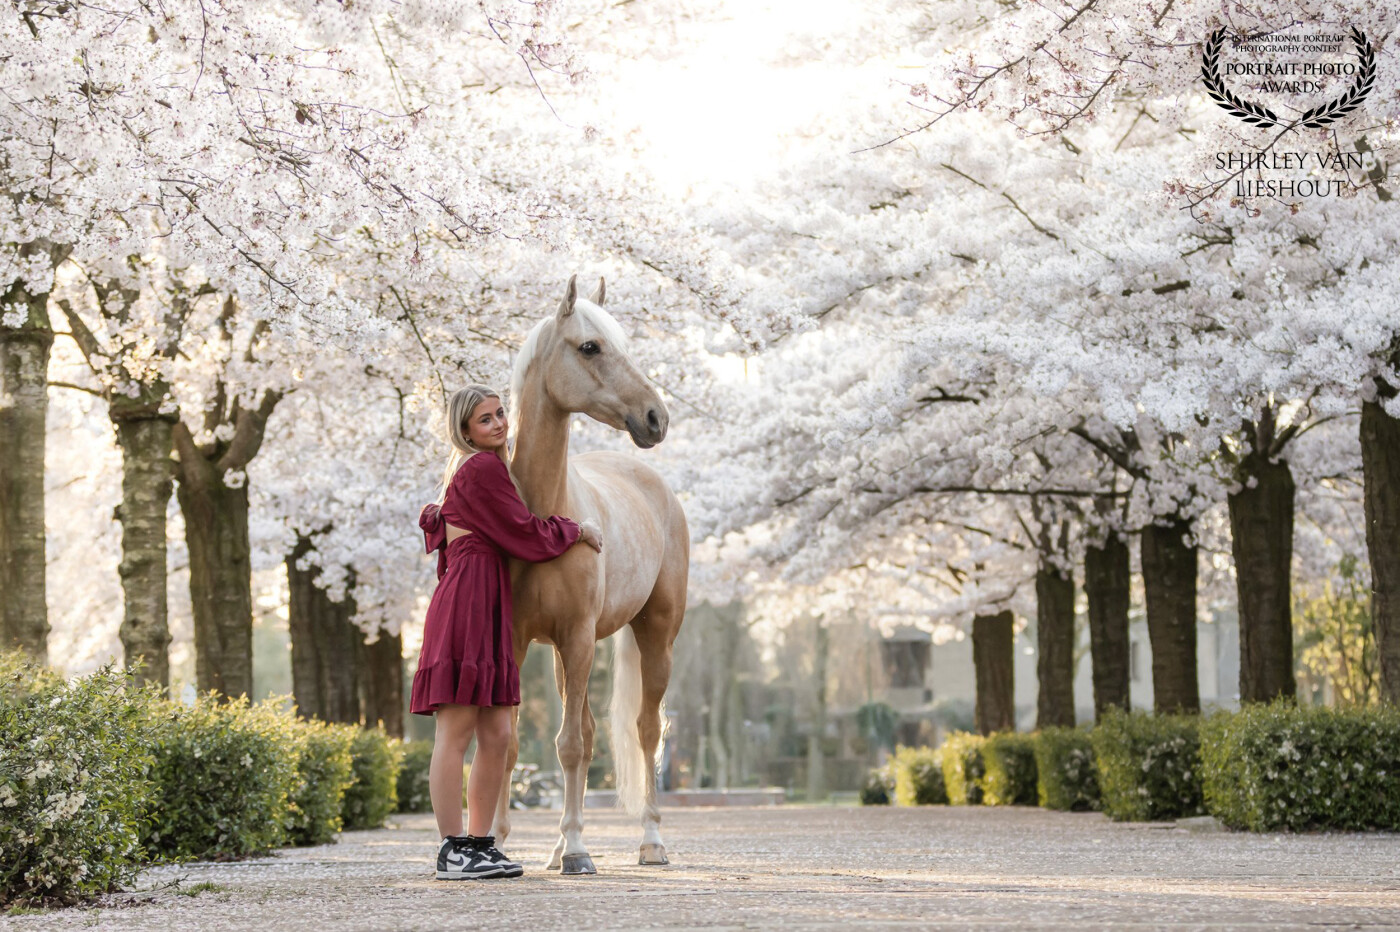 Romee with her Palomino horse Royal underneath the blossoming trees. They are so gorgeous together!